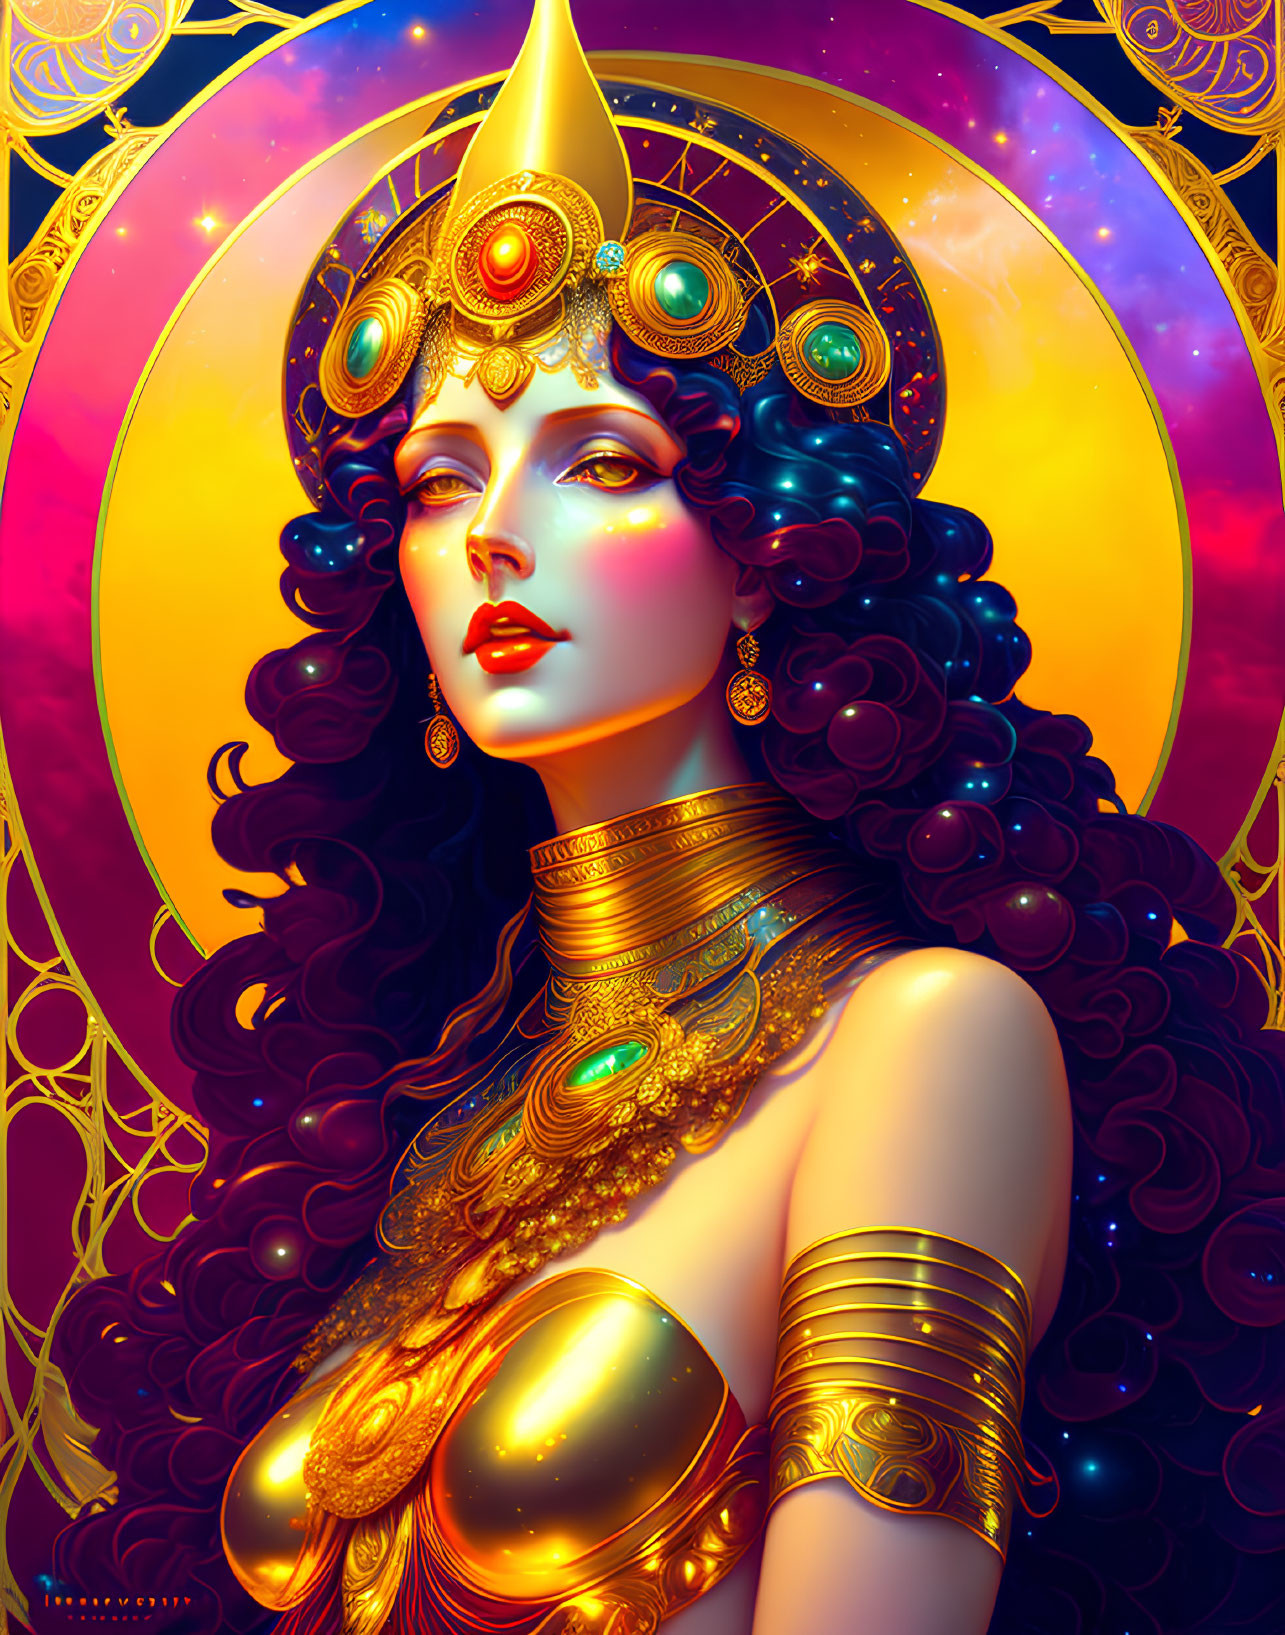 Illustration of Woman with Dark Hair and Golden Adornments on Cosmic Background